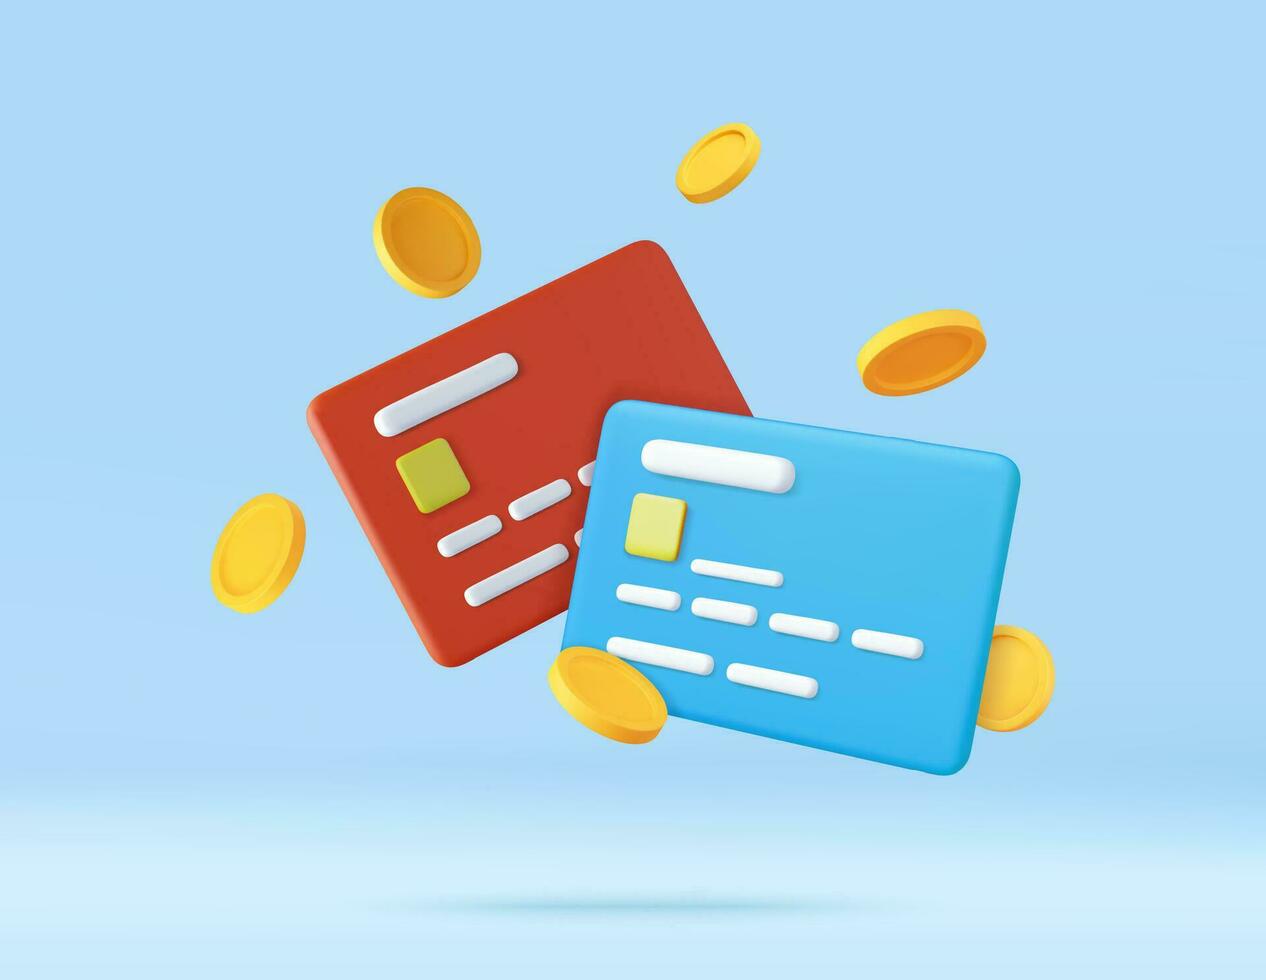 3d Credit card, floating coins around vector